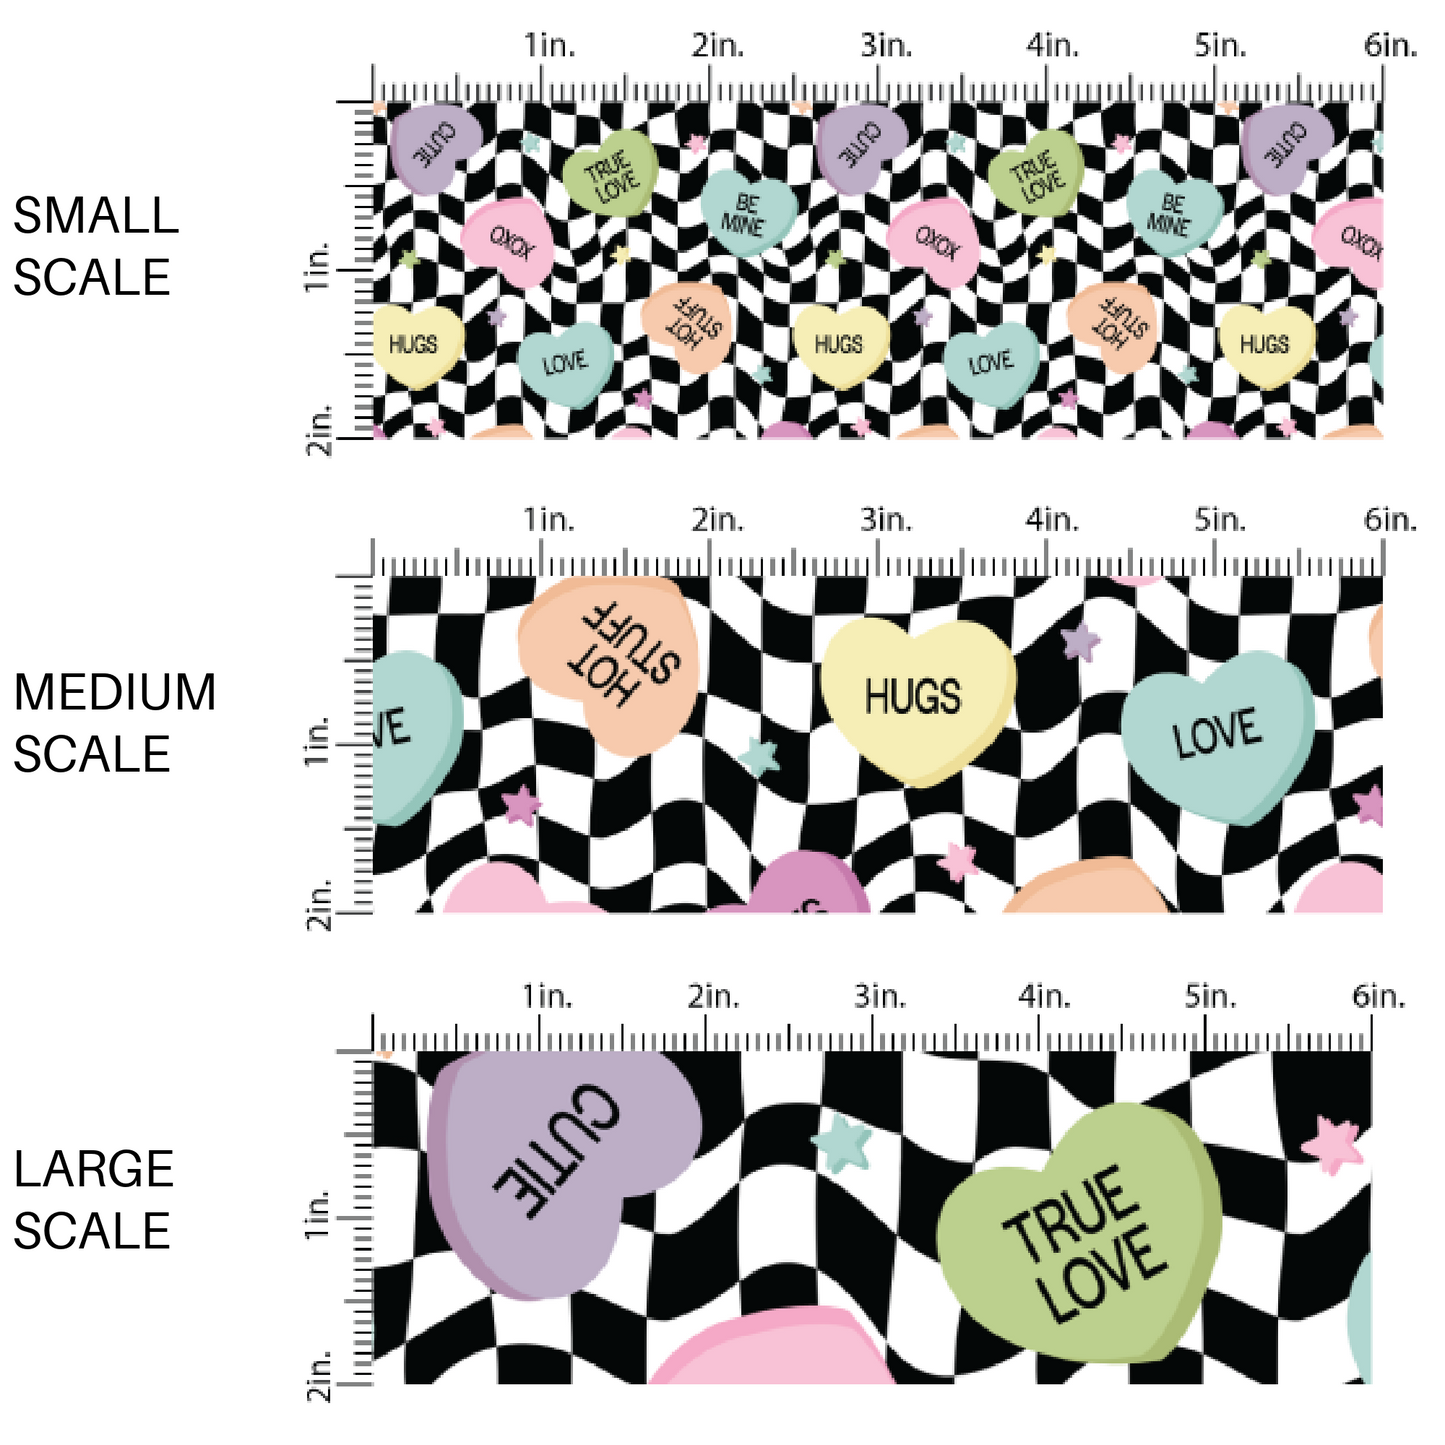 Pastel Conversation Hearts on Black and White Wavy Checkered Fabric by the Yard scaled image guide.